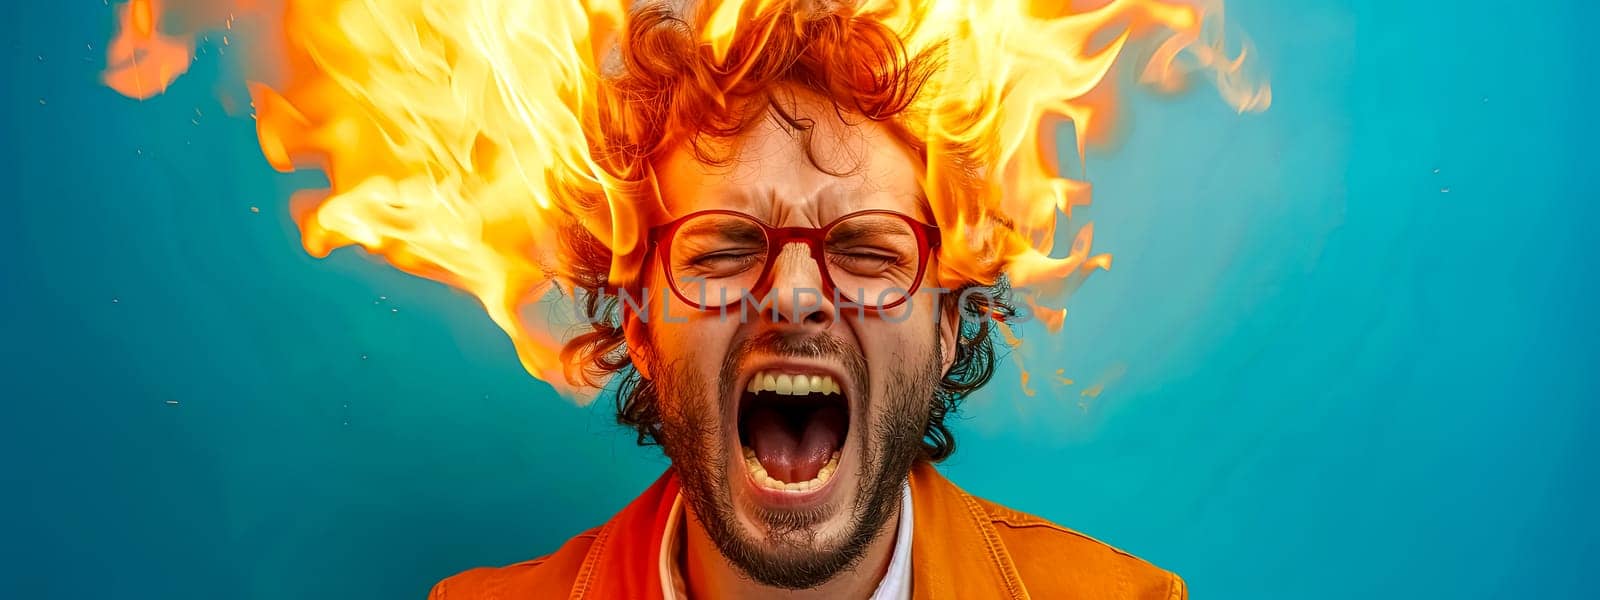 burnout syndrome, Man with fiery hair screaming on blue background, by Edophoto